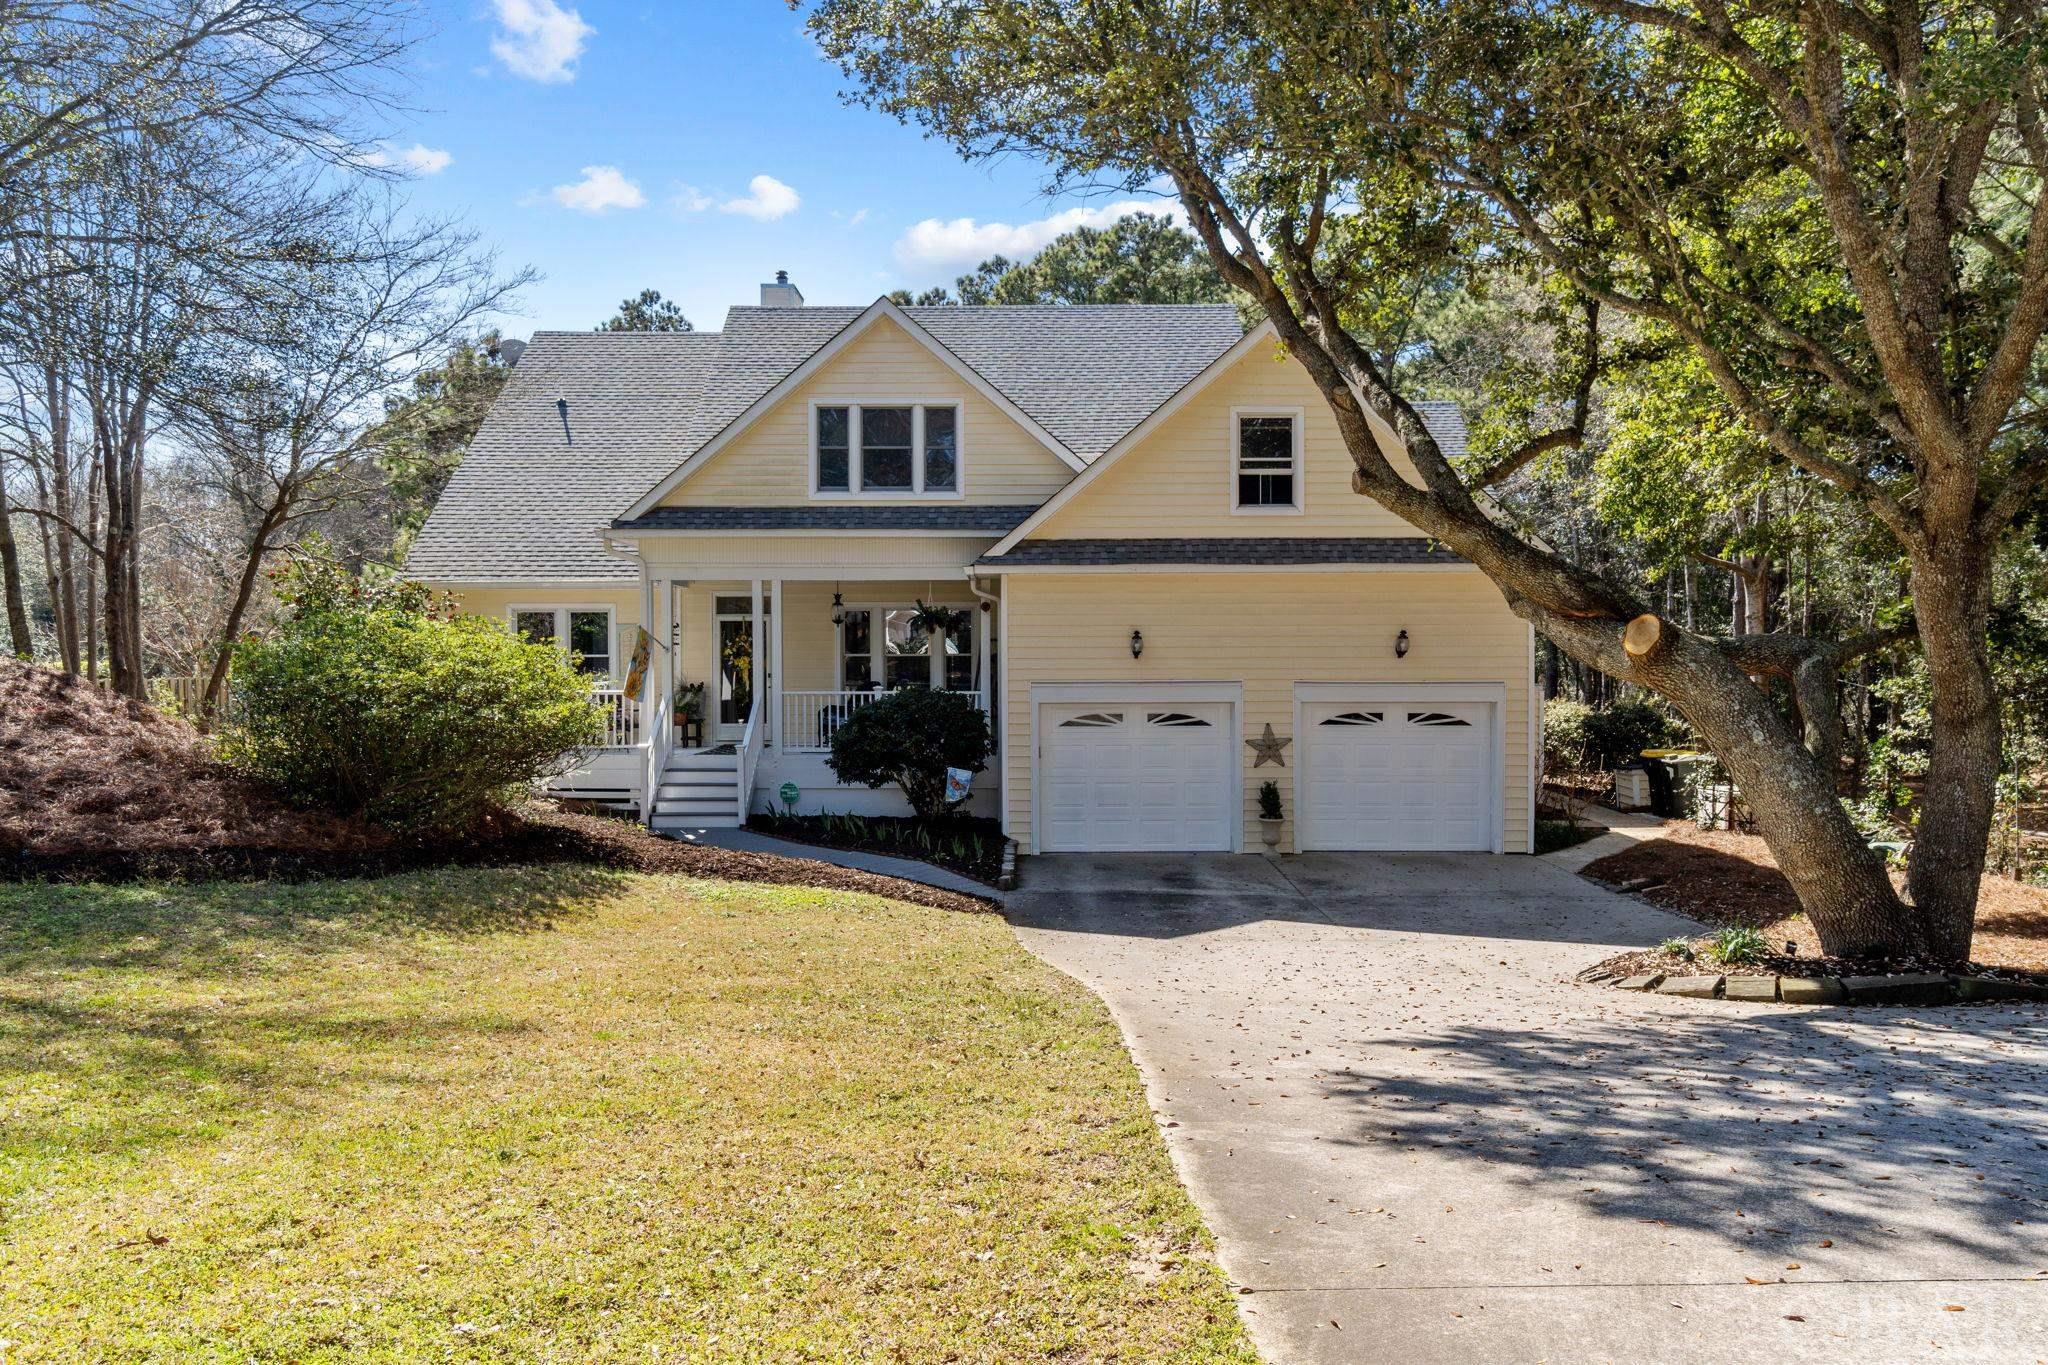 303 Hillcrest Drive, Southern Shores, NC 27949, 4 Bedrooms Bedrooms, ,4 BathroomsBathrooms,Residential,For sale,Hillcrest Drive,125334